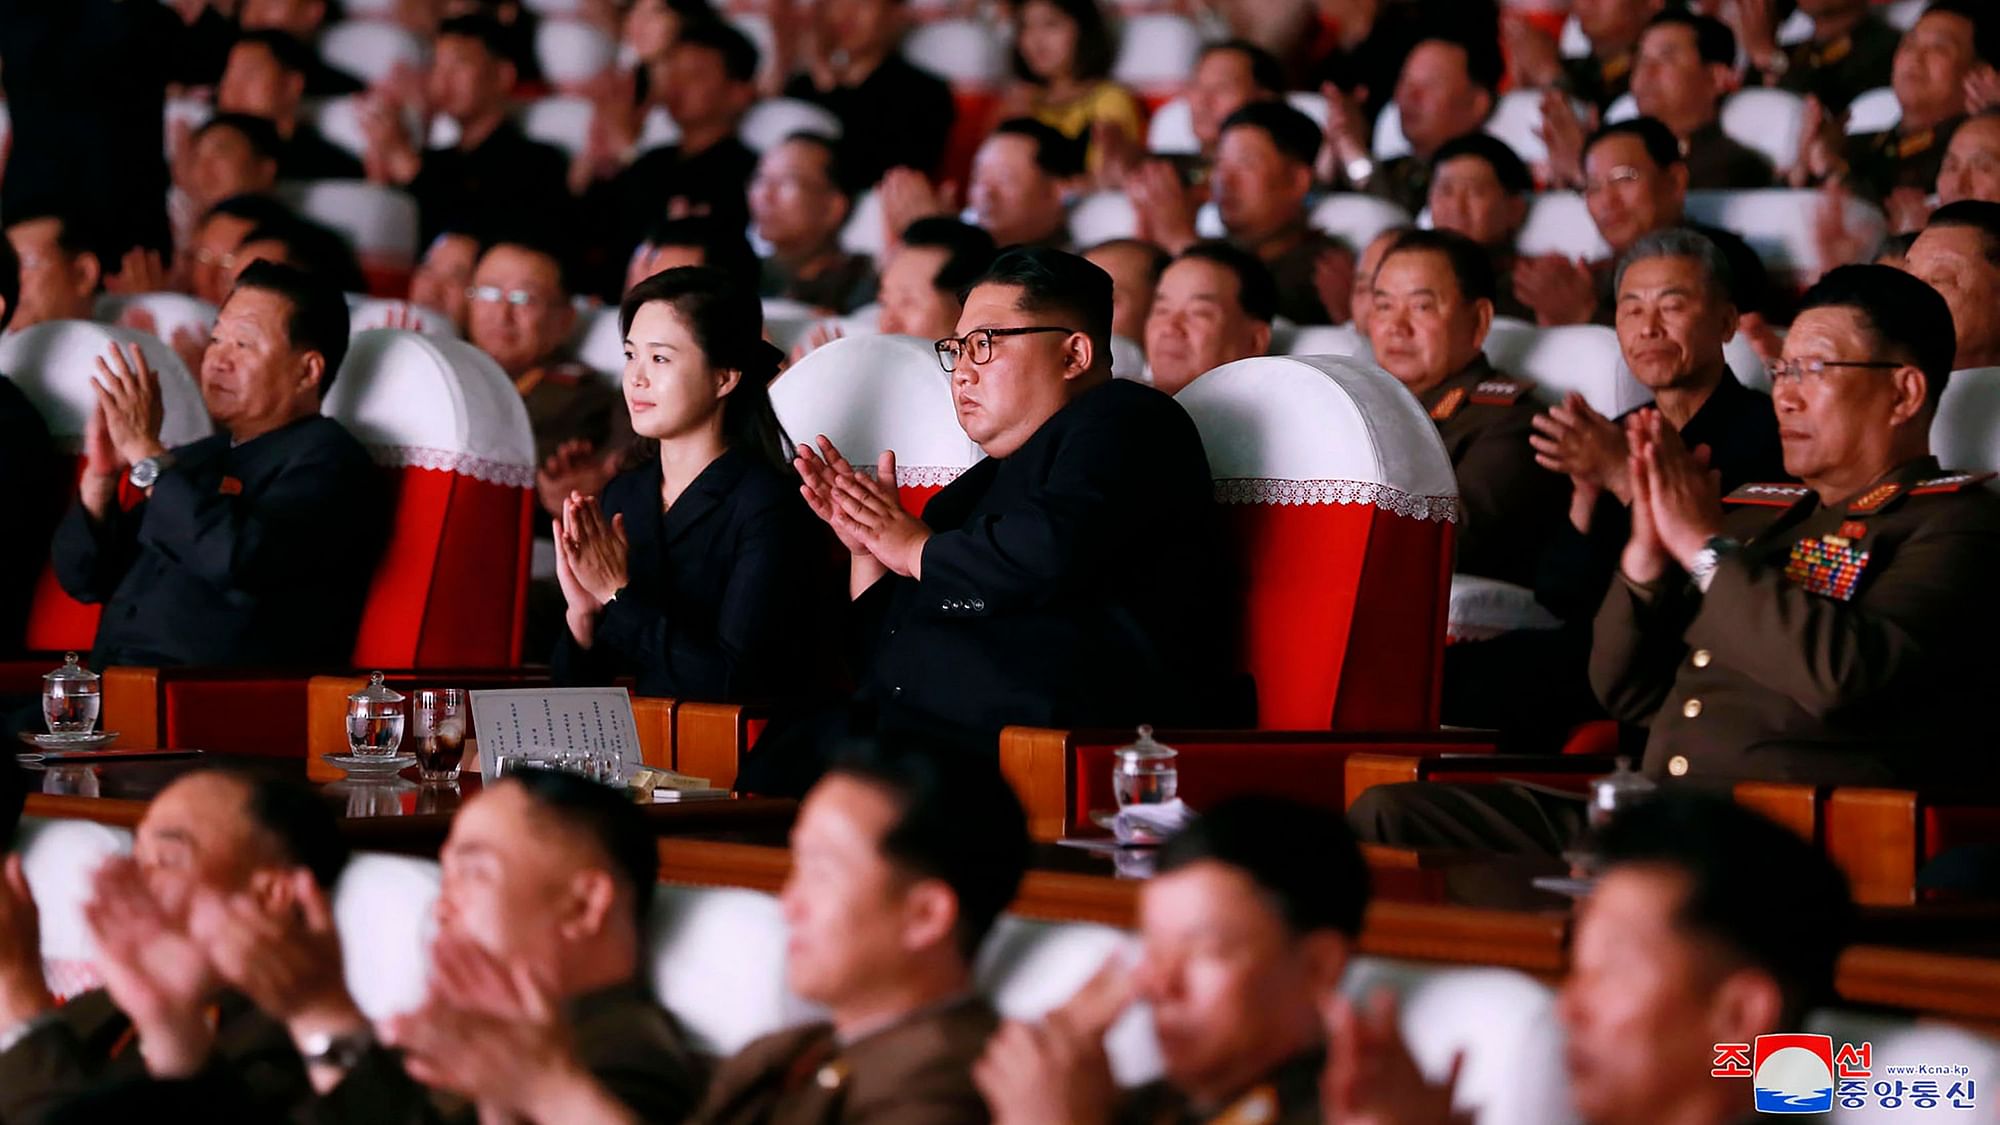  A senior North Korean official who had been reported as purged can be seen alongside leader Kim Jong Un.